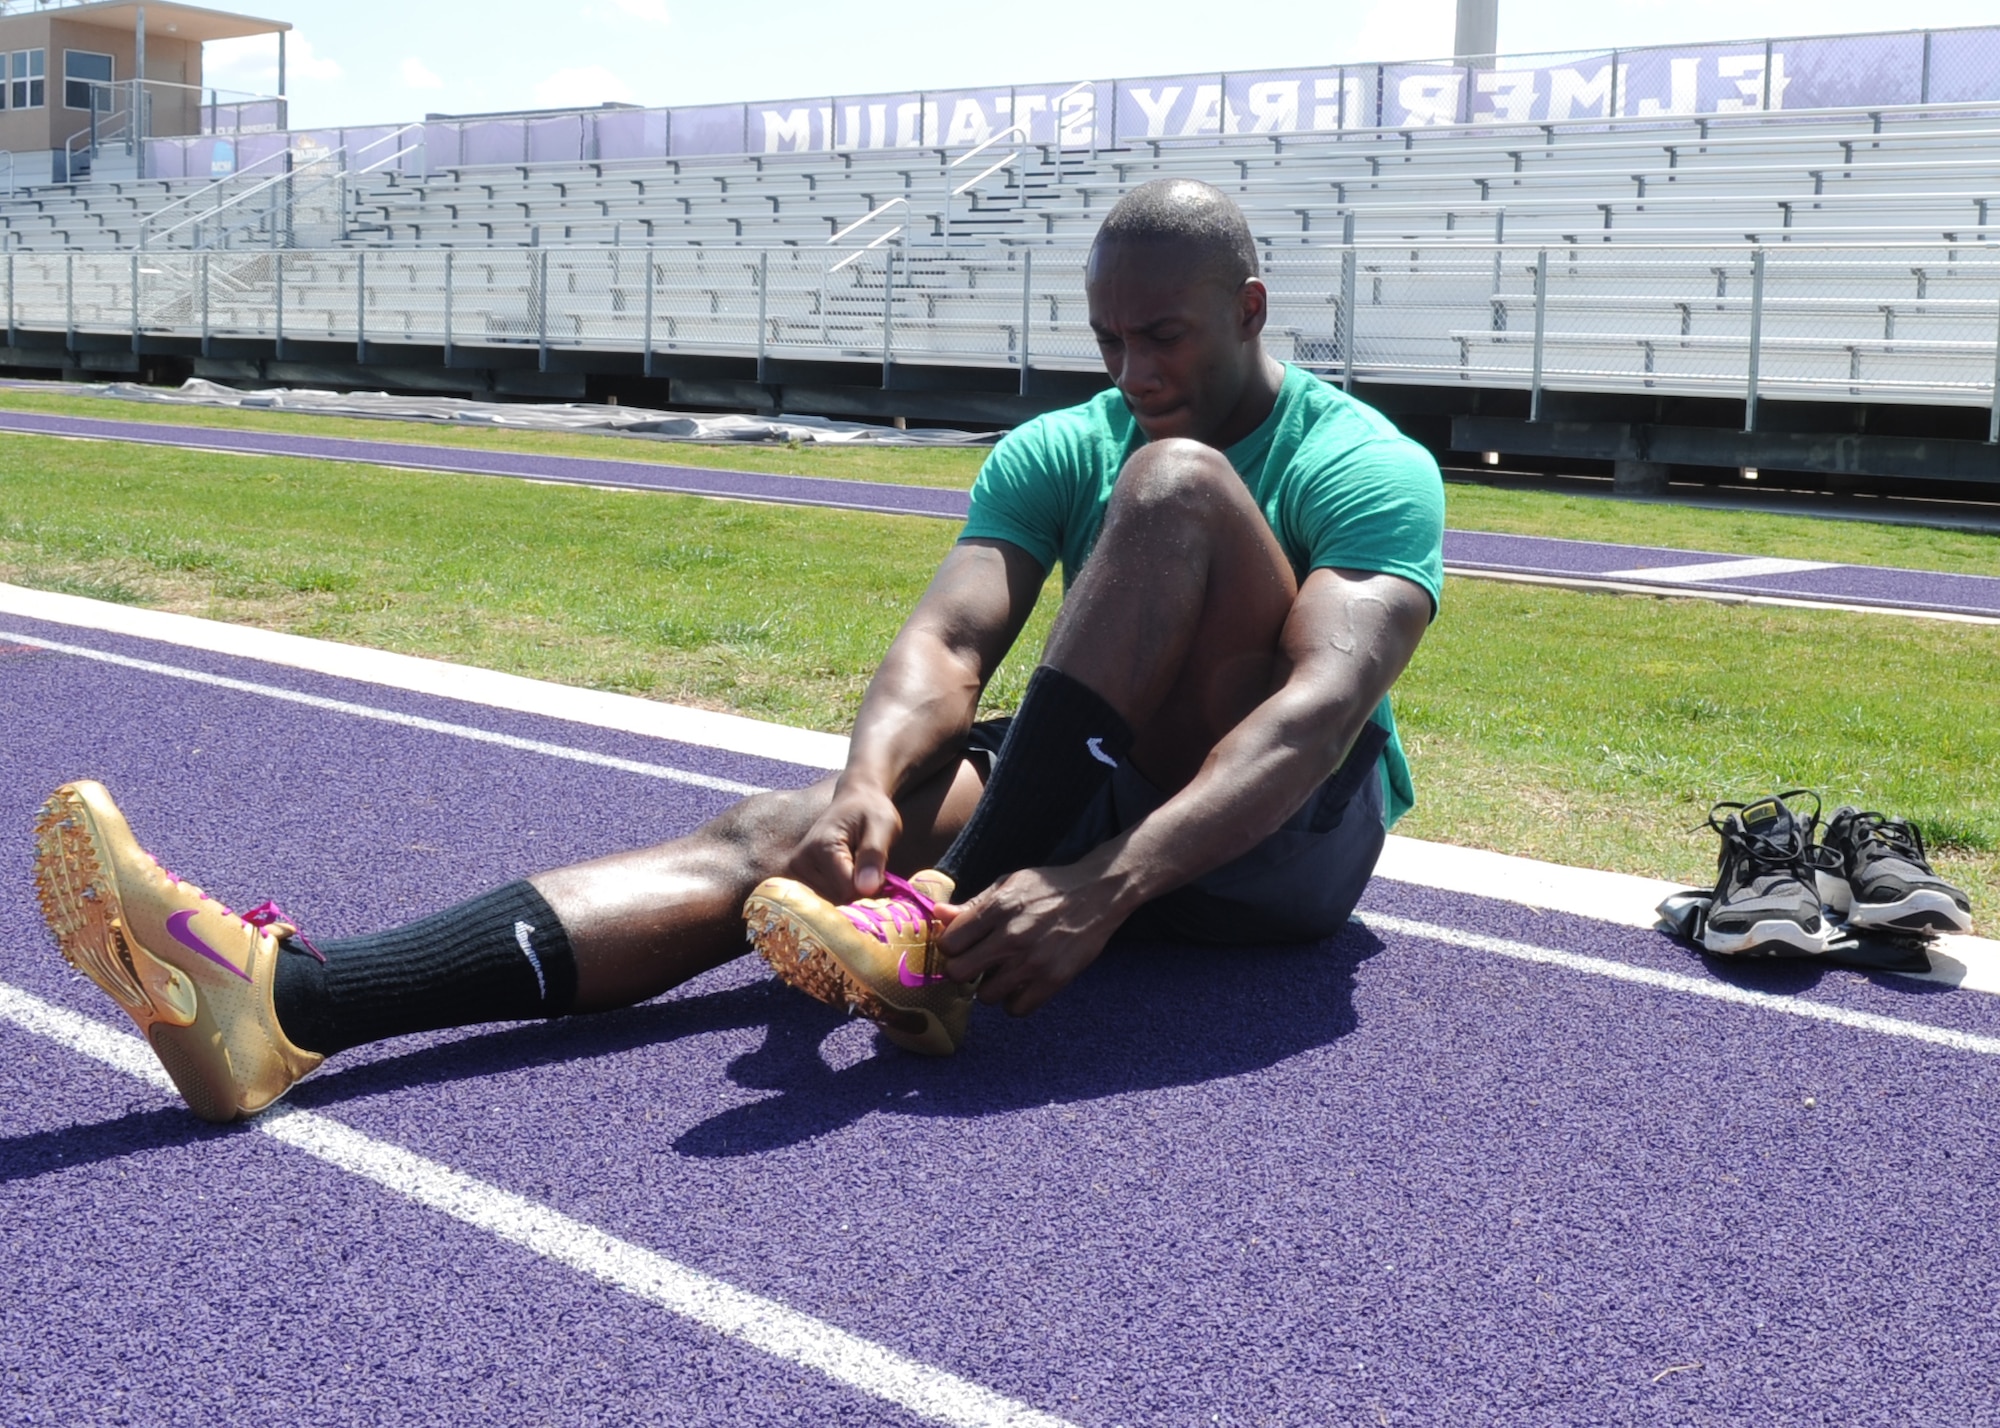 U.S. Air Force Senior Airman Kwesi Toney, 7th Logistics Readiness Squadron equipment accountability clerk, puts on his track spikes at Abilene Christian University May 18, 2015, in Abilene, Texas. Toney competed in long jump, javelin and the 4x100 meter relay at the 2015 Headquarter Air Command Track and Field Championship. Toney came in 6th place in long jump, 8th in javelin and 2nd in the relay.(U.S. Air Force photo by Senior Airman Shannon Hall/Released)